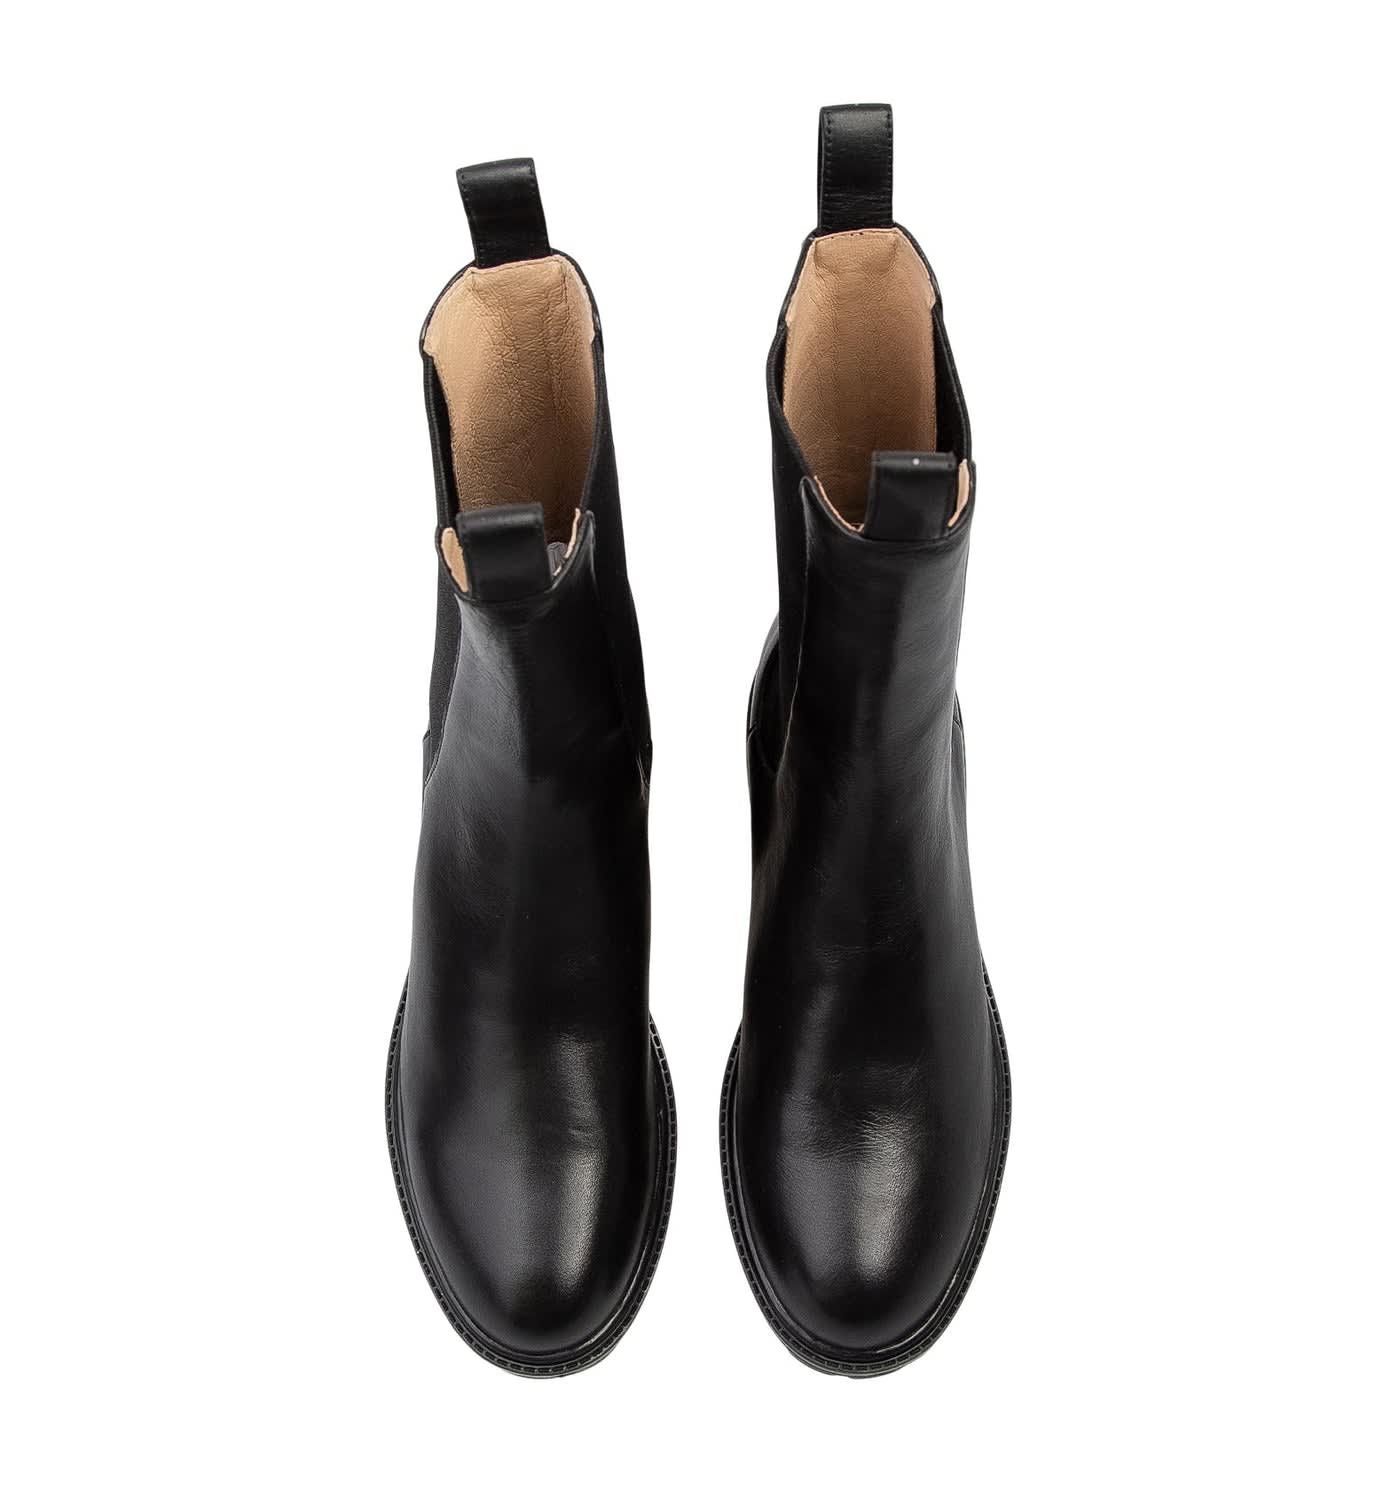 Tapaculo Black Leather Flat Boots | Bared Footwear